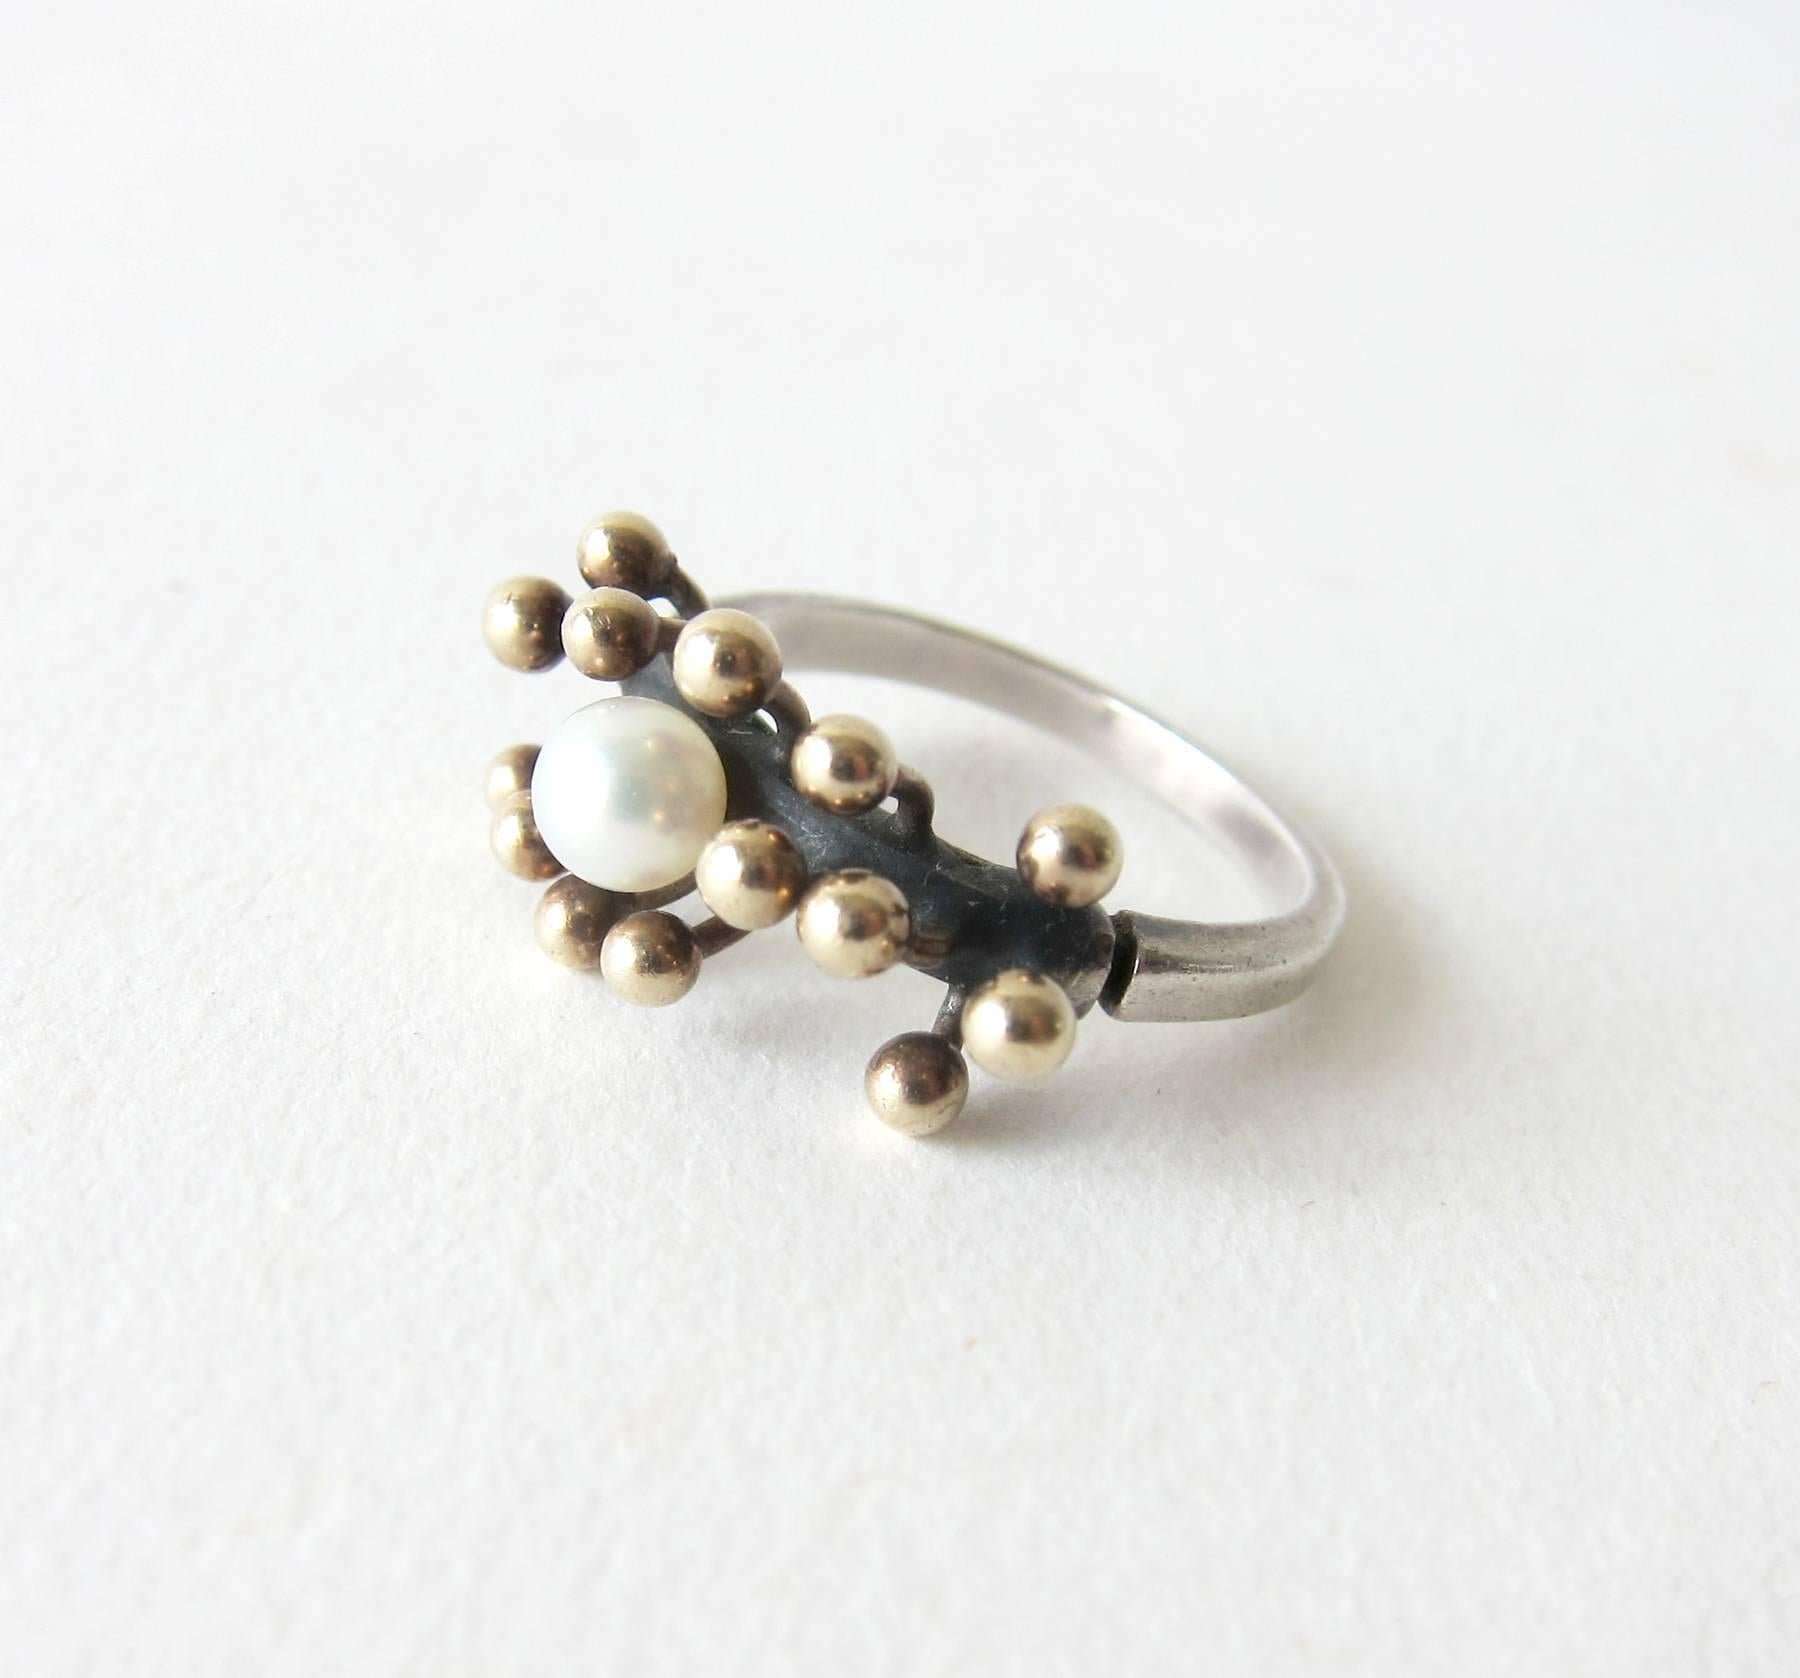 Sterling silver ring with 18k gold spores surrounding a freshwater pearl created by Jay Tuttle of San Jose, California.  Ring is a finger size 6.5 to 6.75 and is signed Tuttle, Sterling.  An unconventional alternative to a modern day engagement